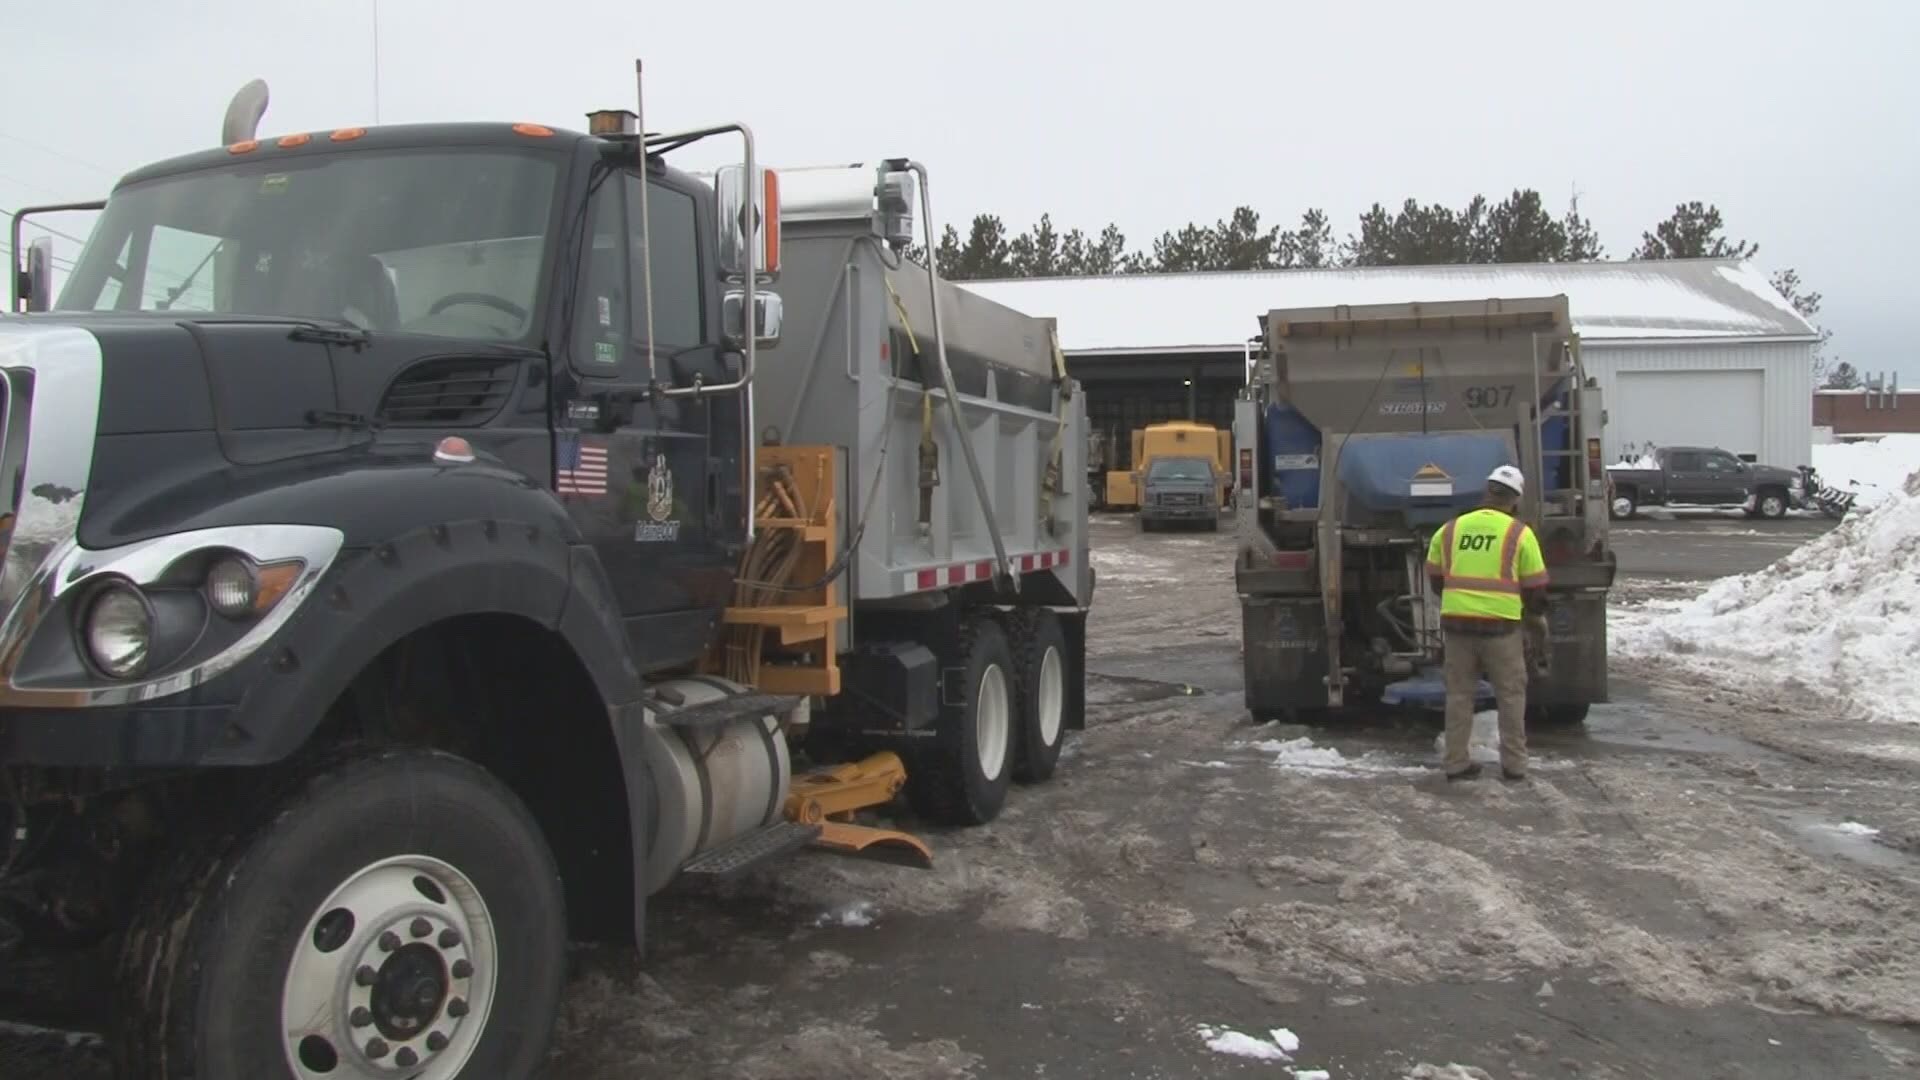 On Thursday, Maine DOT crews spent some time putting snowblades back on their trucks and getting ready to be on standby for a mid-April storm.